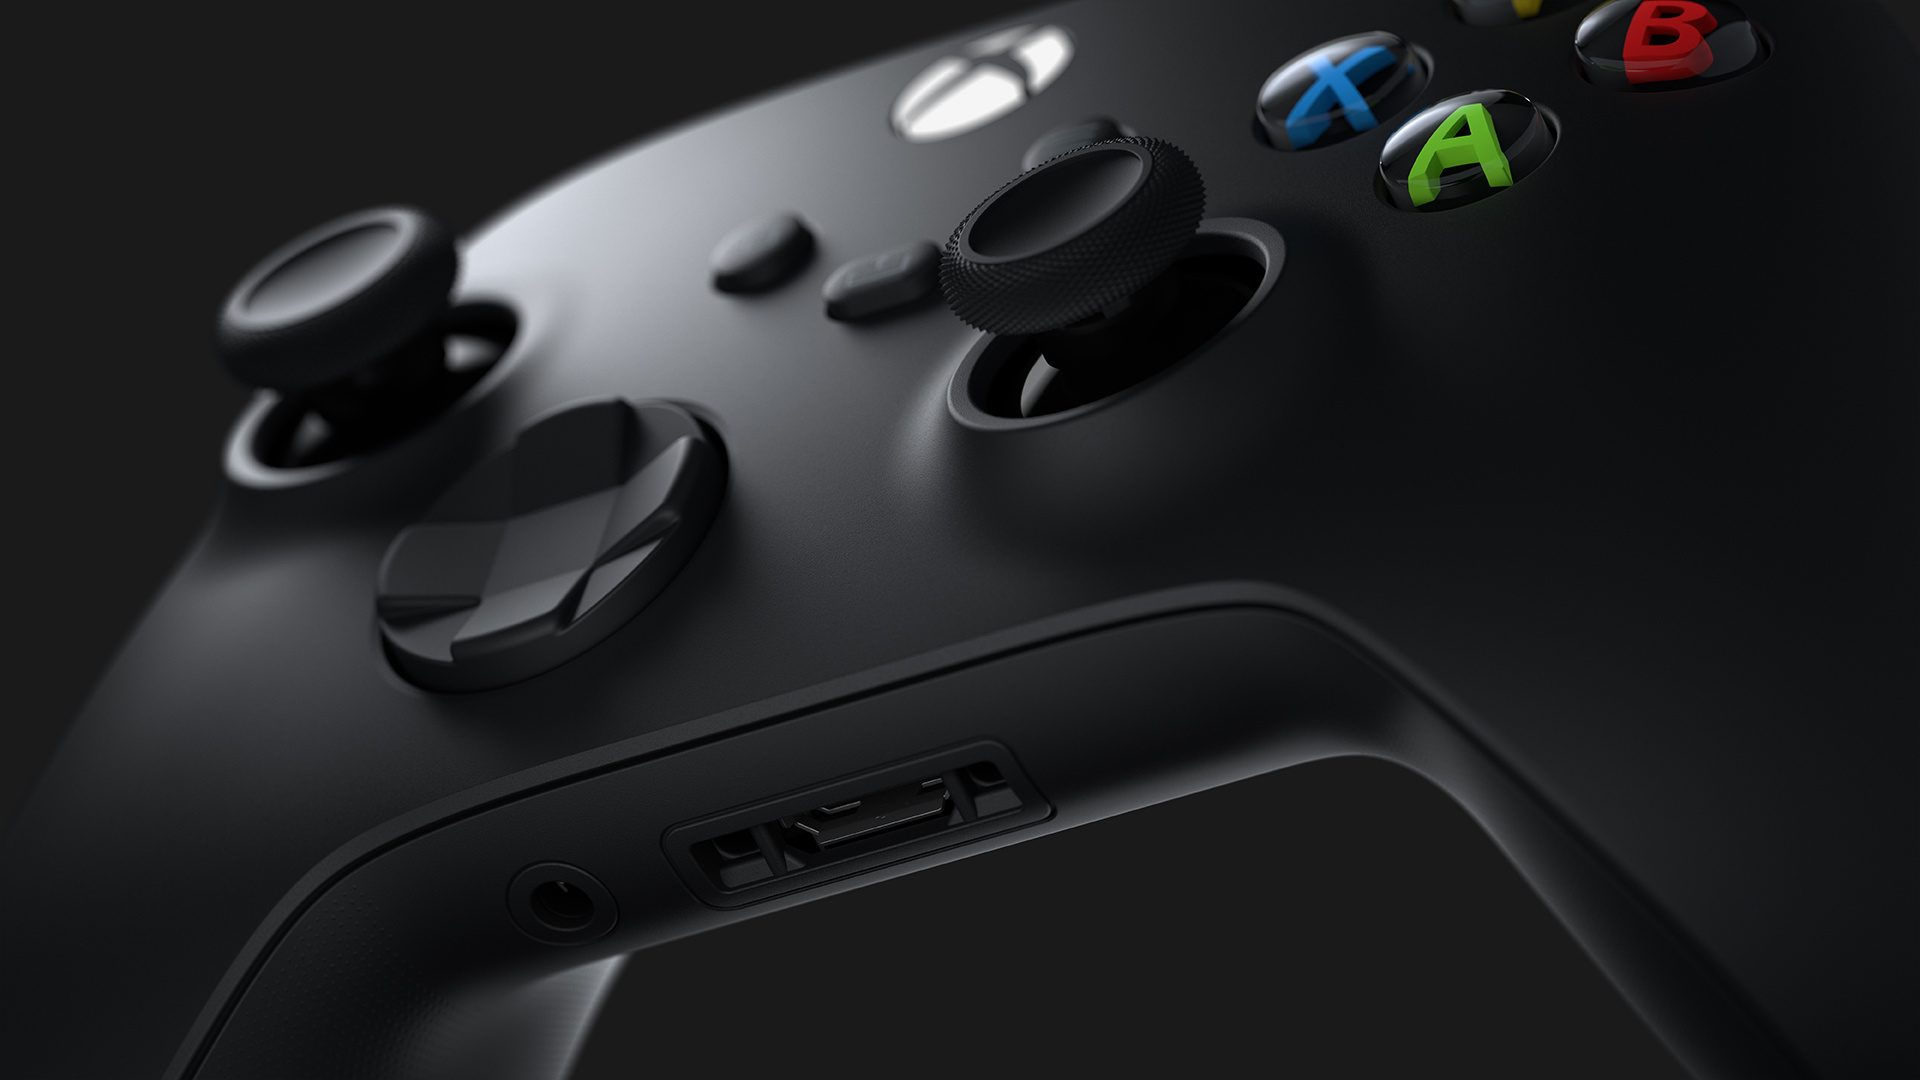 Xbox: ABXY buttons, A controller, More ergonomic to fit a larger range of hand sizes. 1920x1080 Full HD Background.